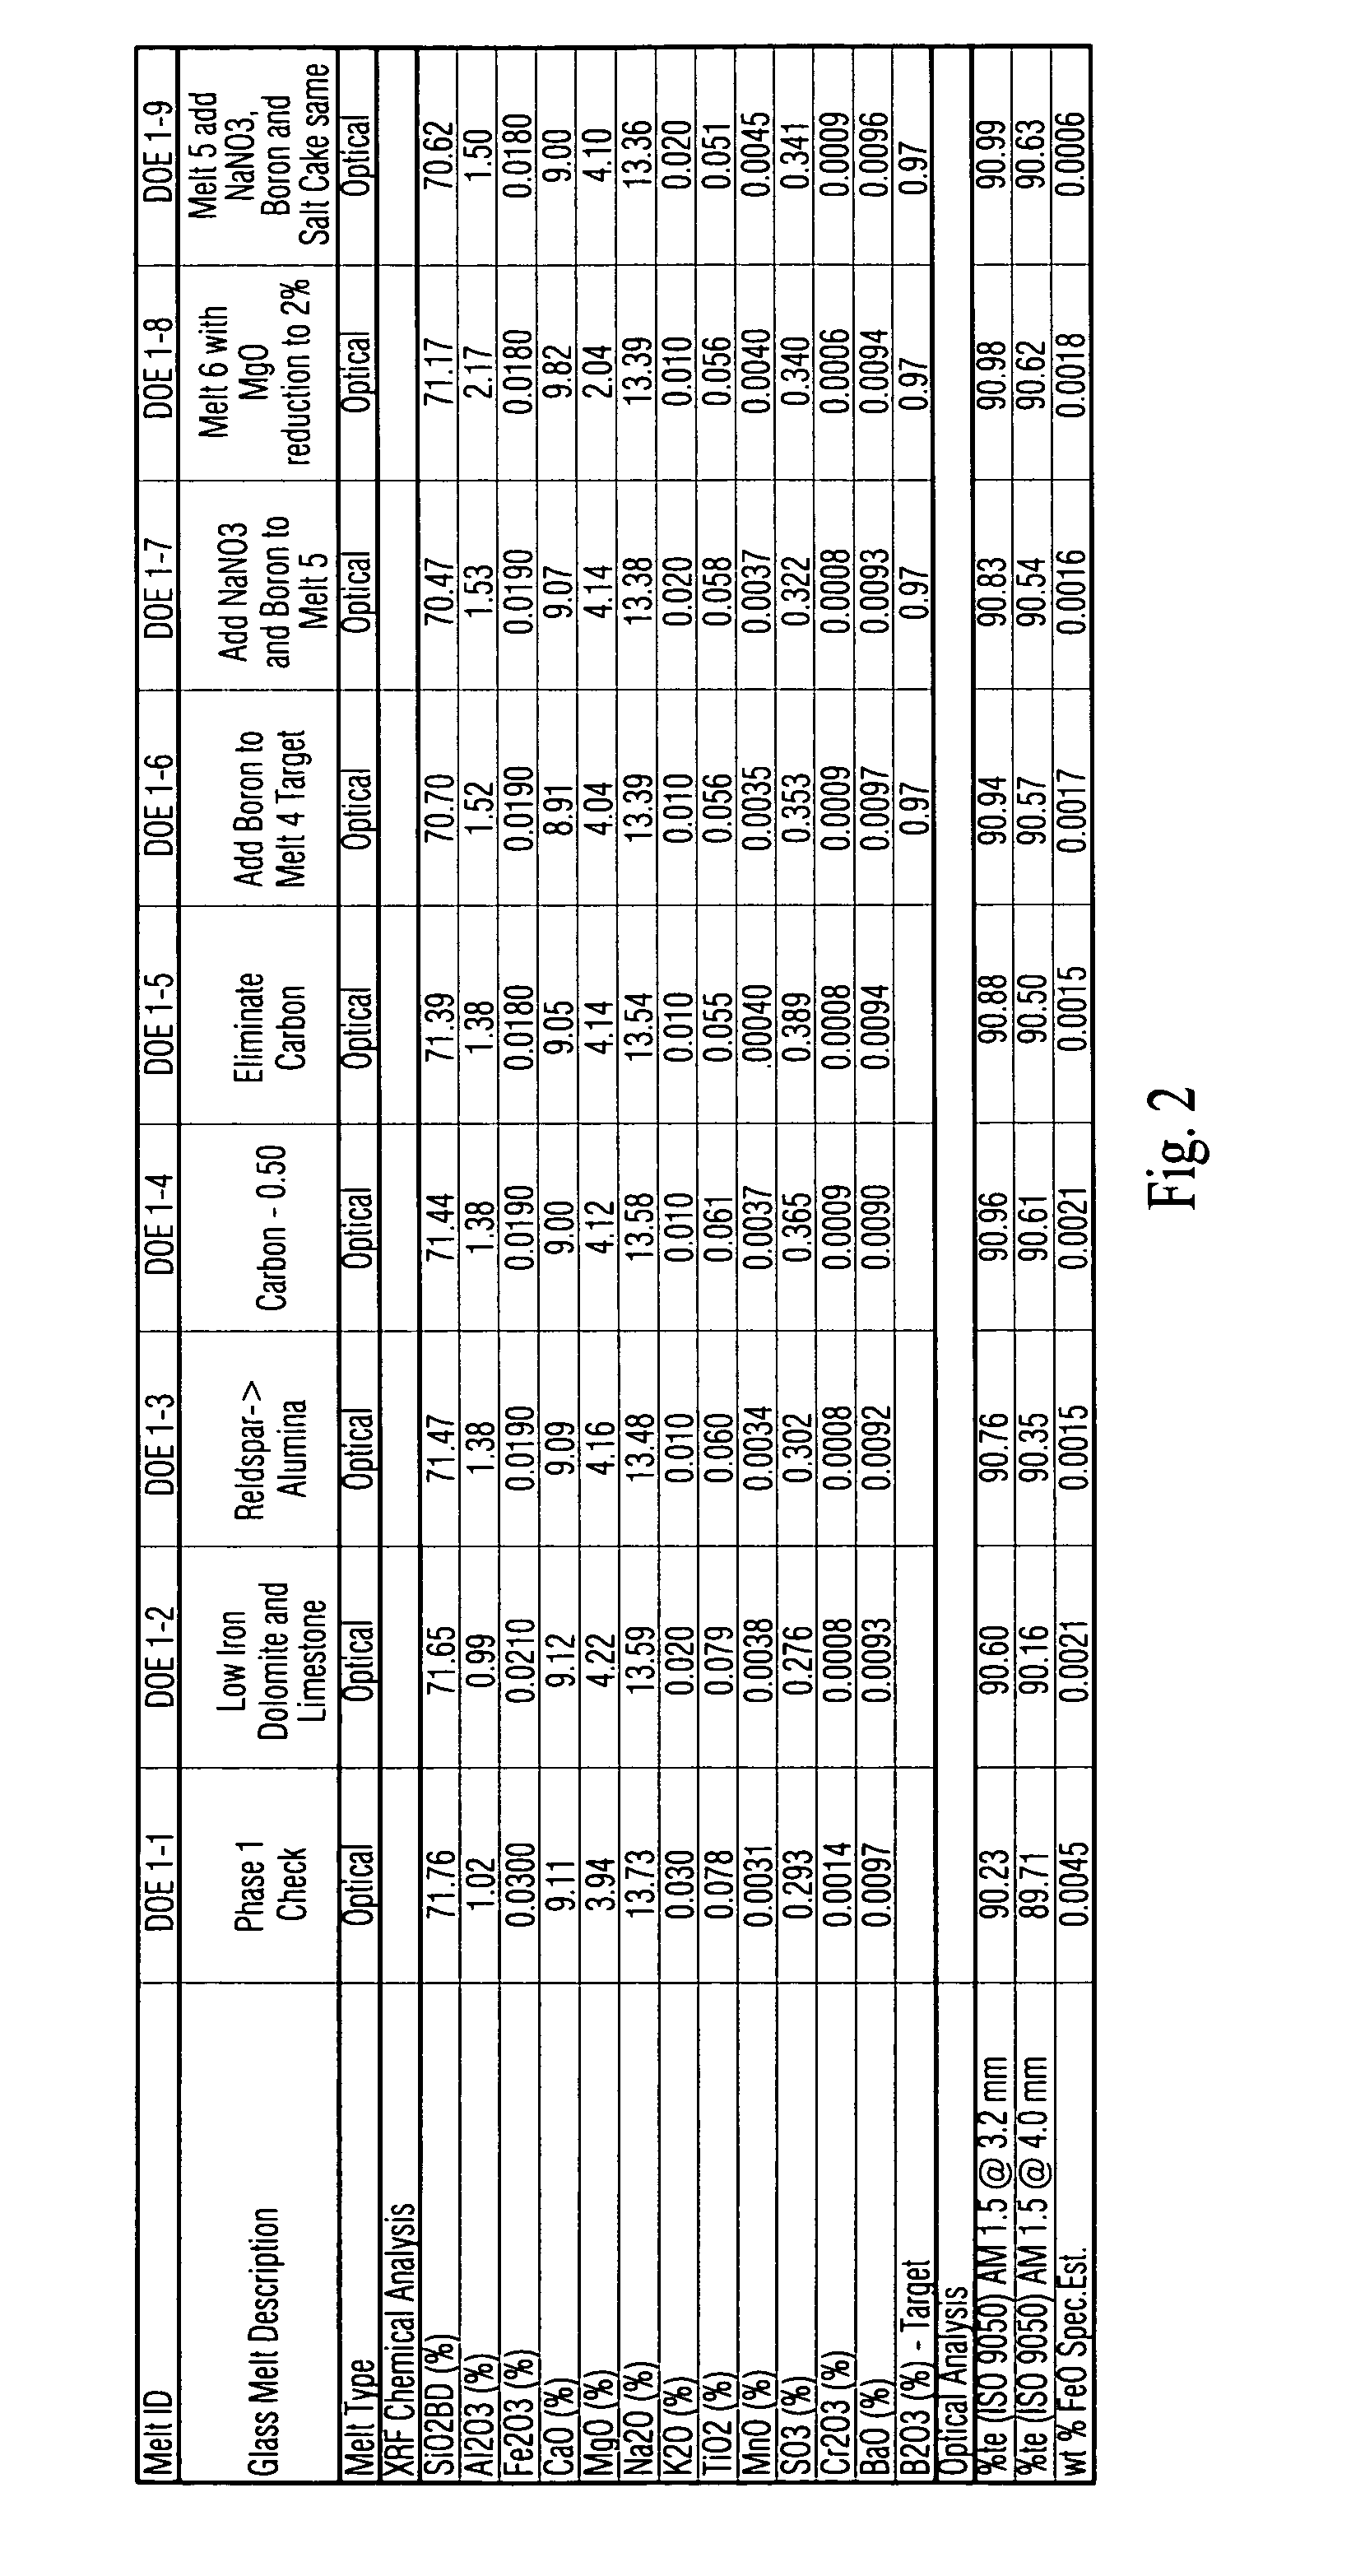 Low iron high transmission glass with boron oxide for improved optics, durability and refining, and corresponding method